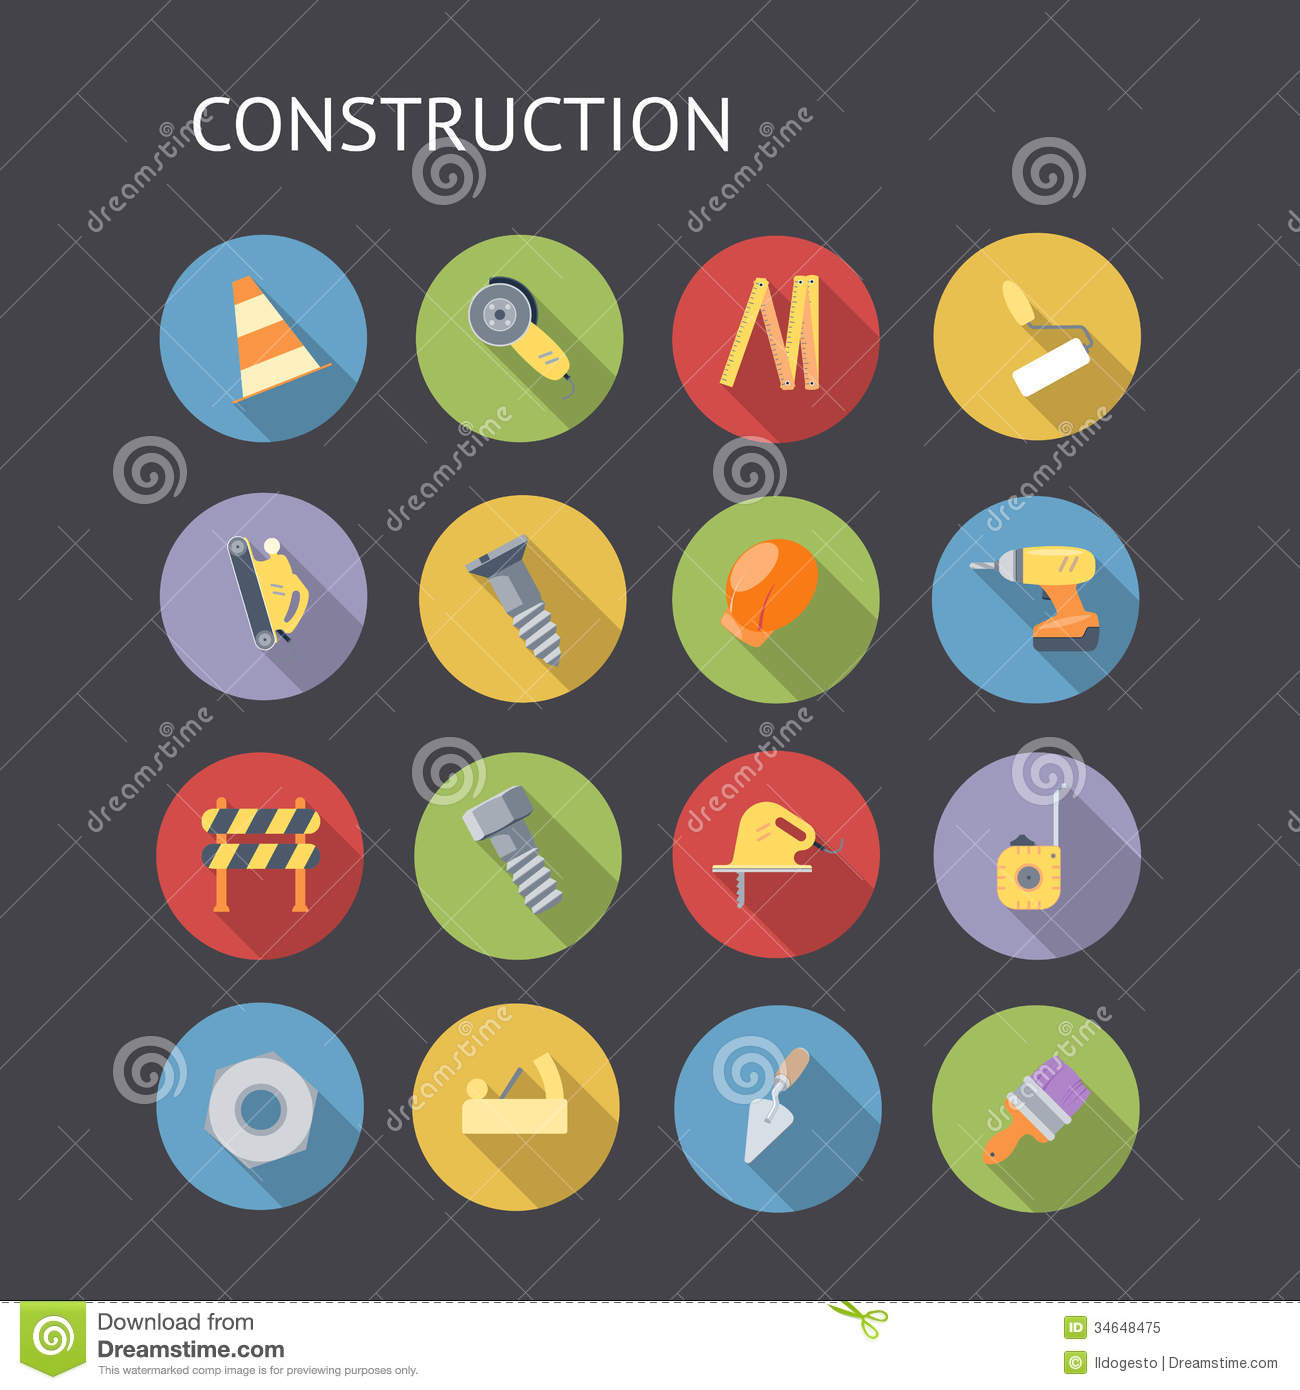 Construction Industry Icons Free